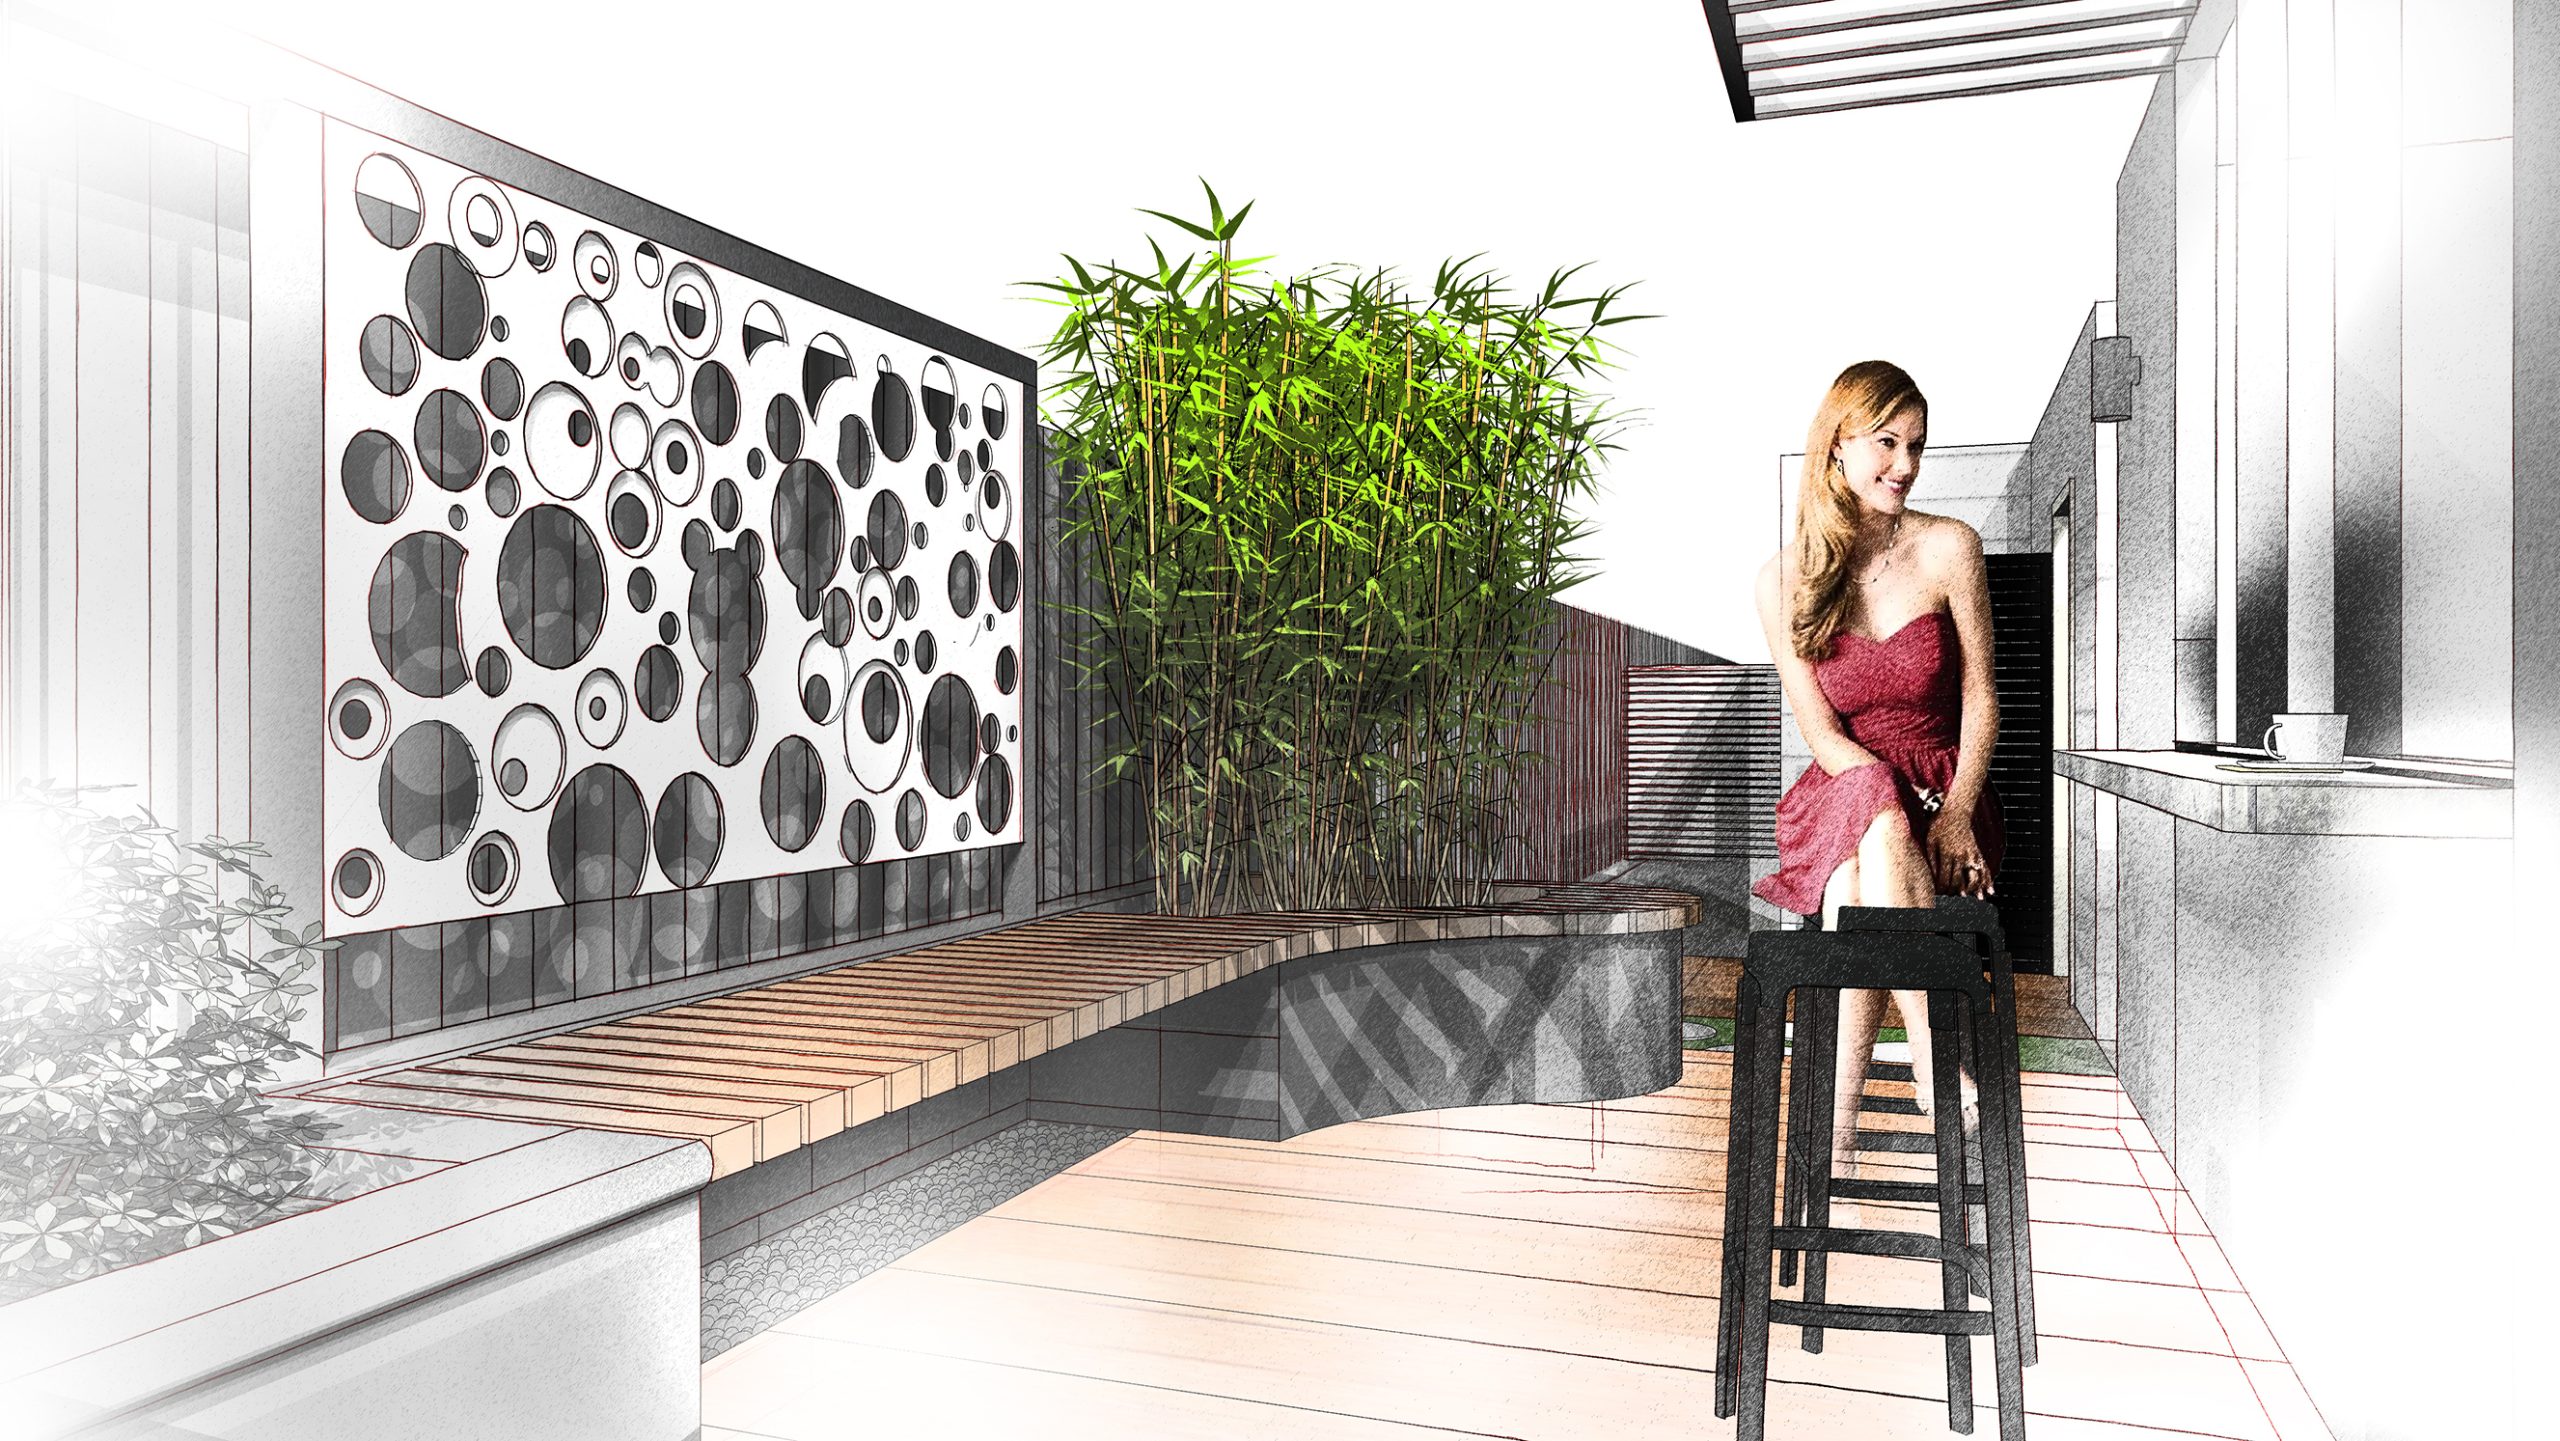 Small courtyard concept, decking, entertainers space, metal artwork